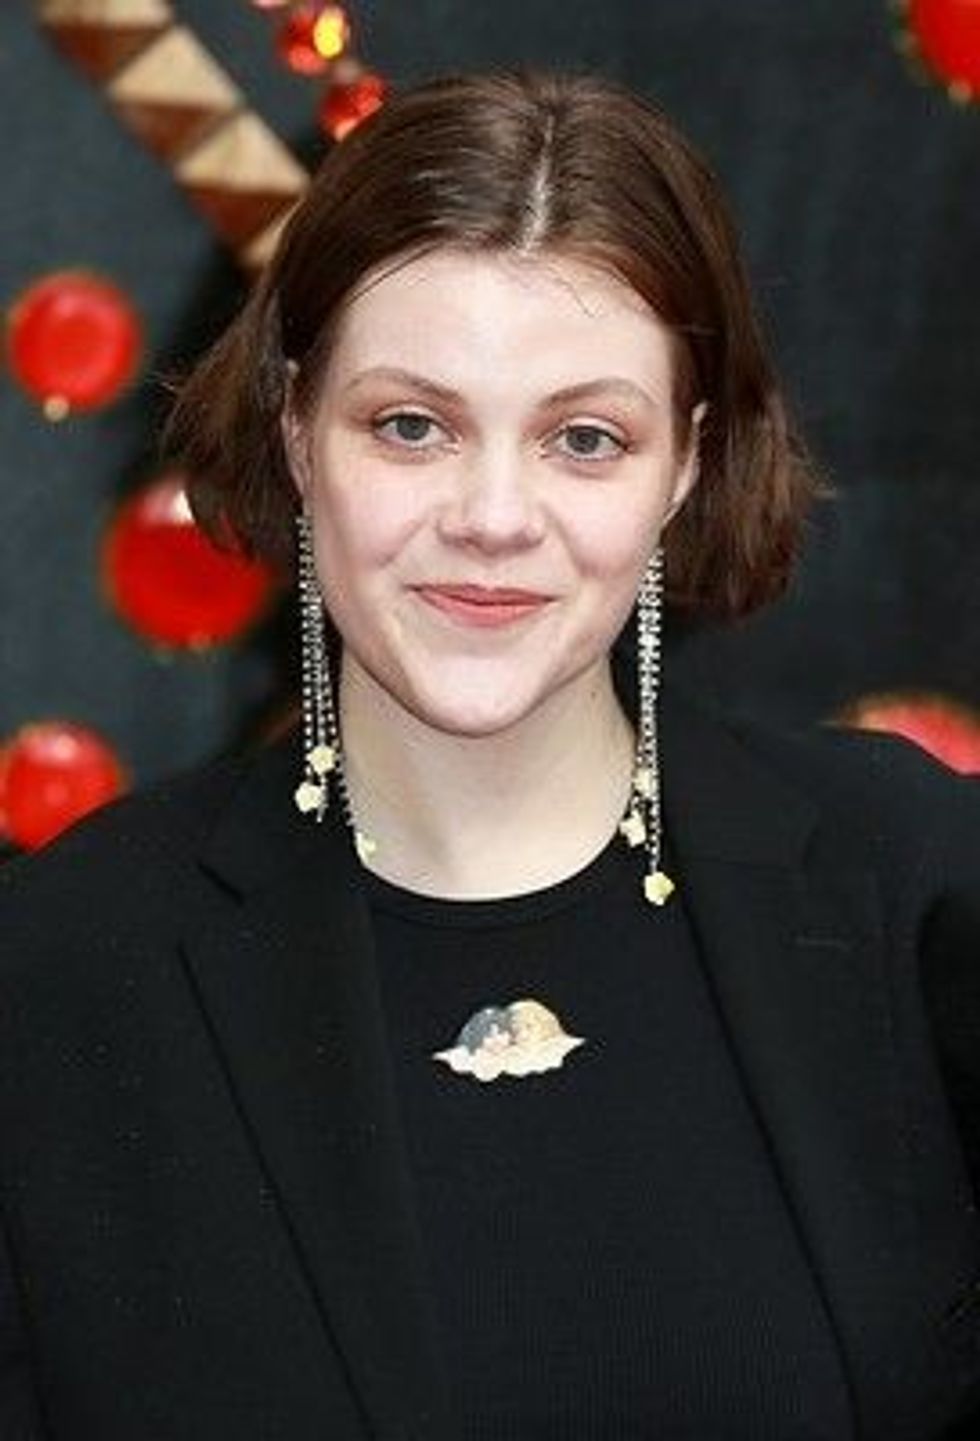 Read Georgie Henley facts to know more about this actor's debut and family life in West Yorkshire, England.